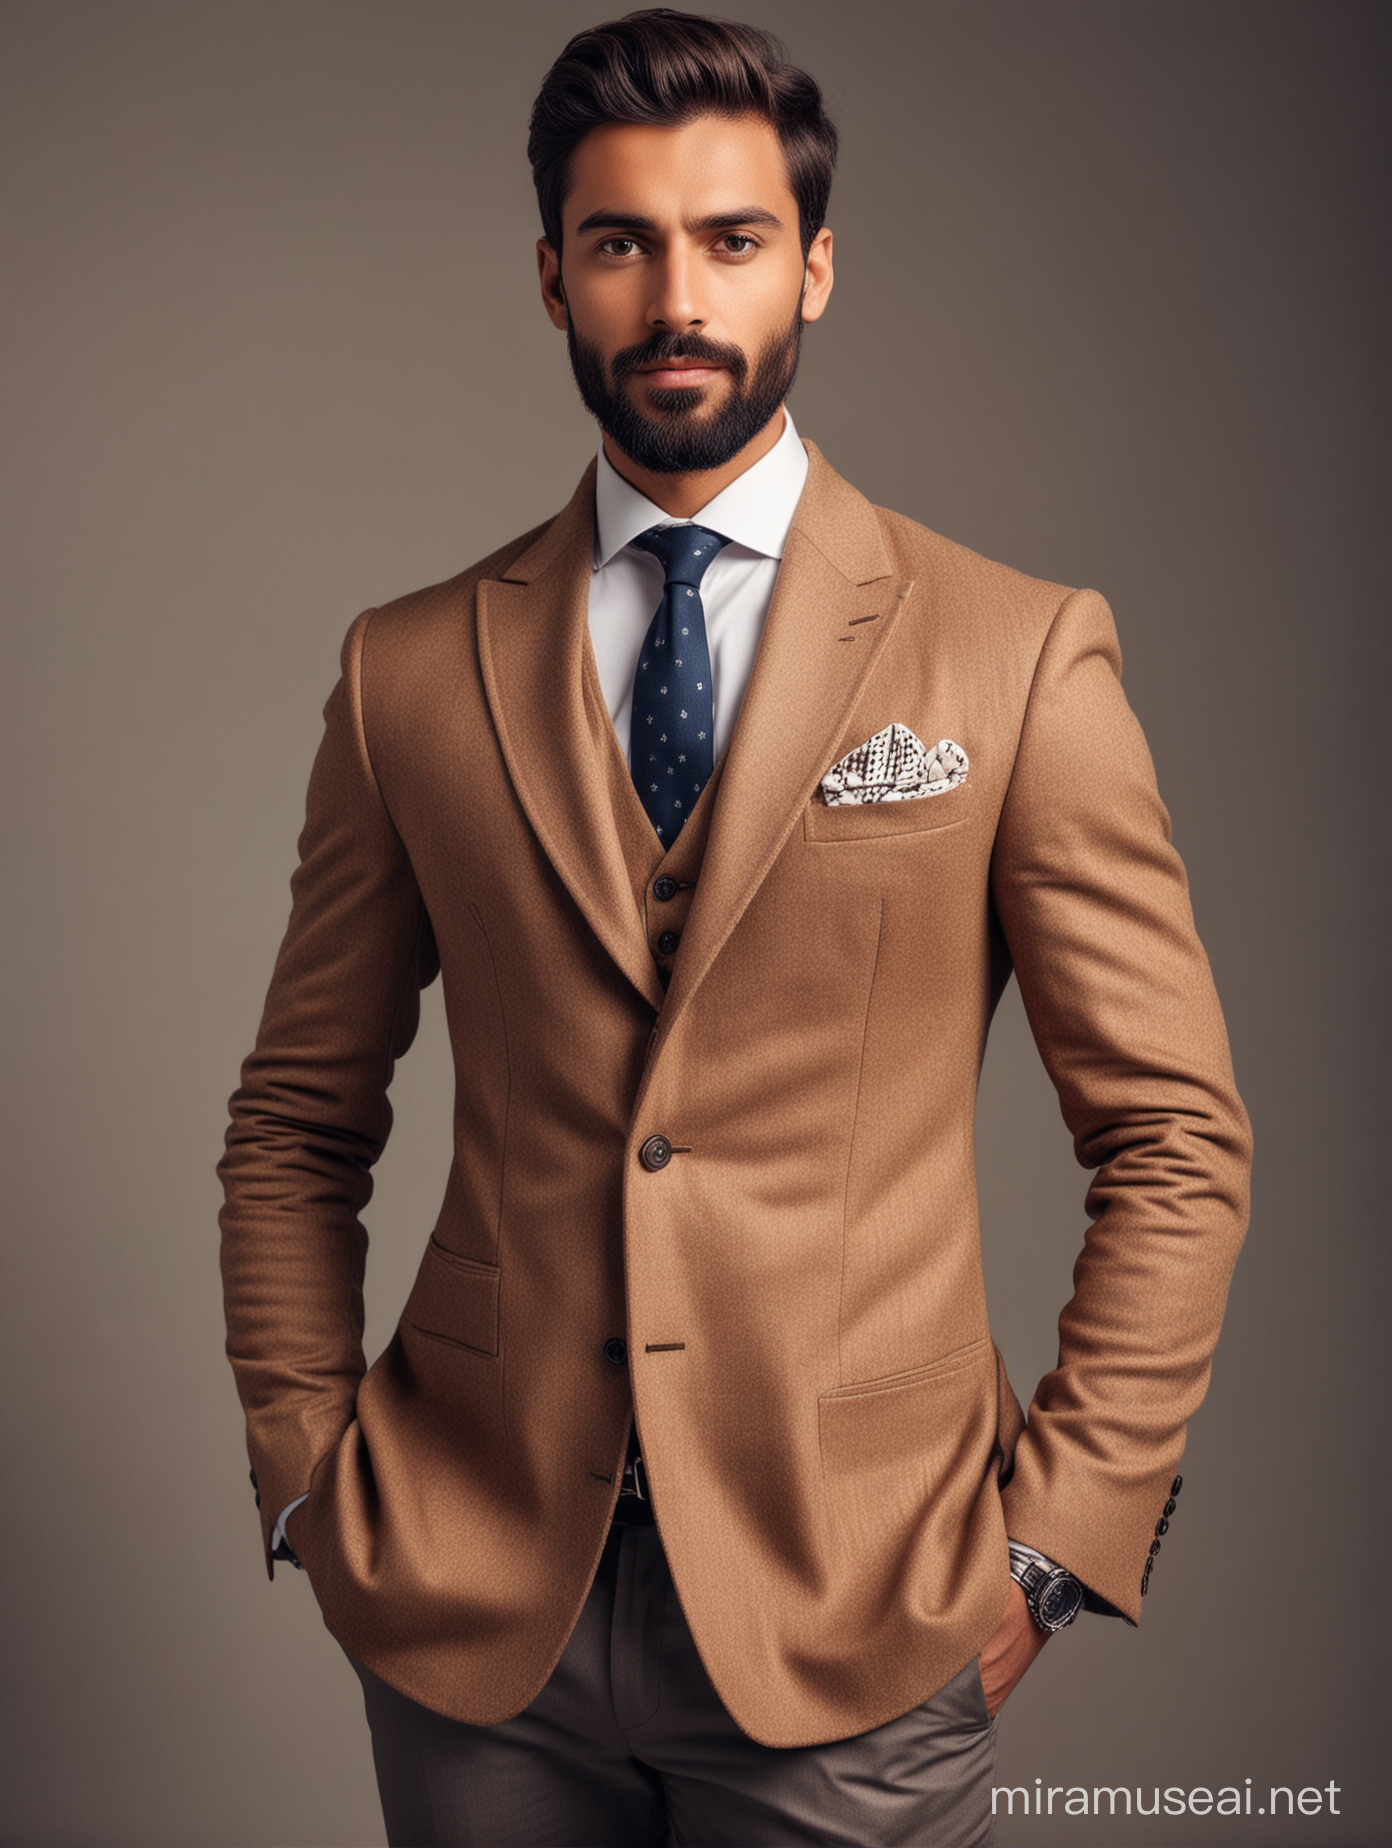 Elegant Alpha Male Portrait of a Handsome European Man with Indian Features